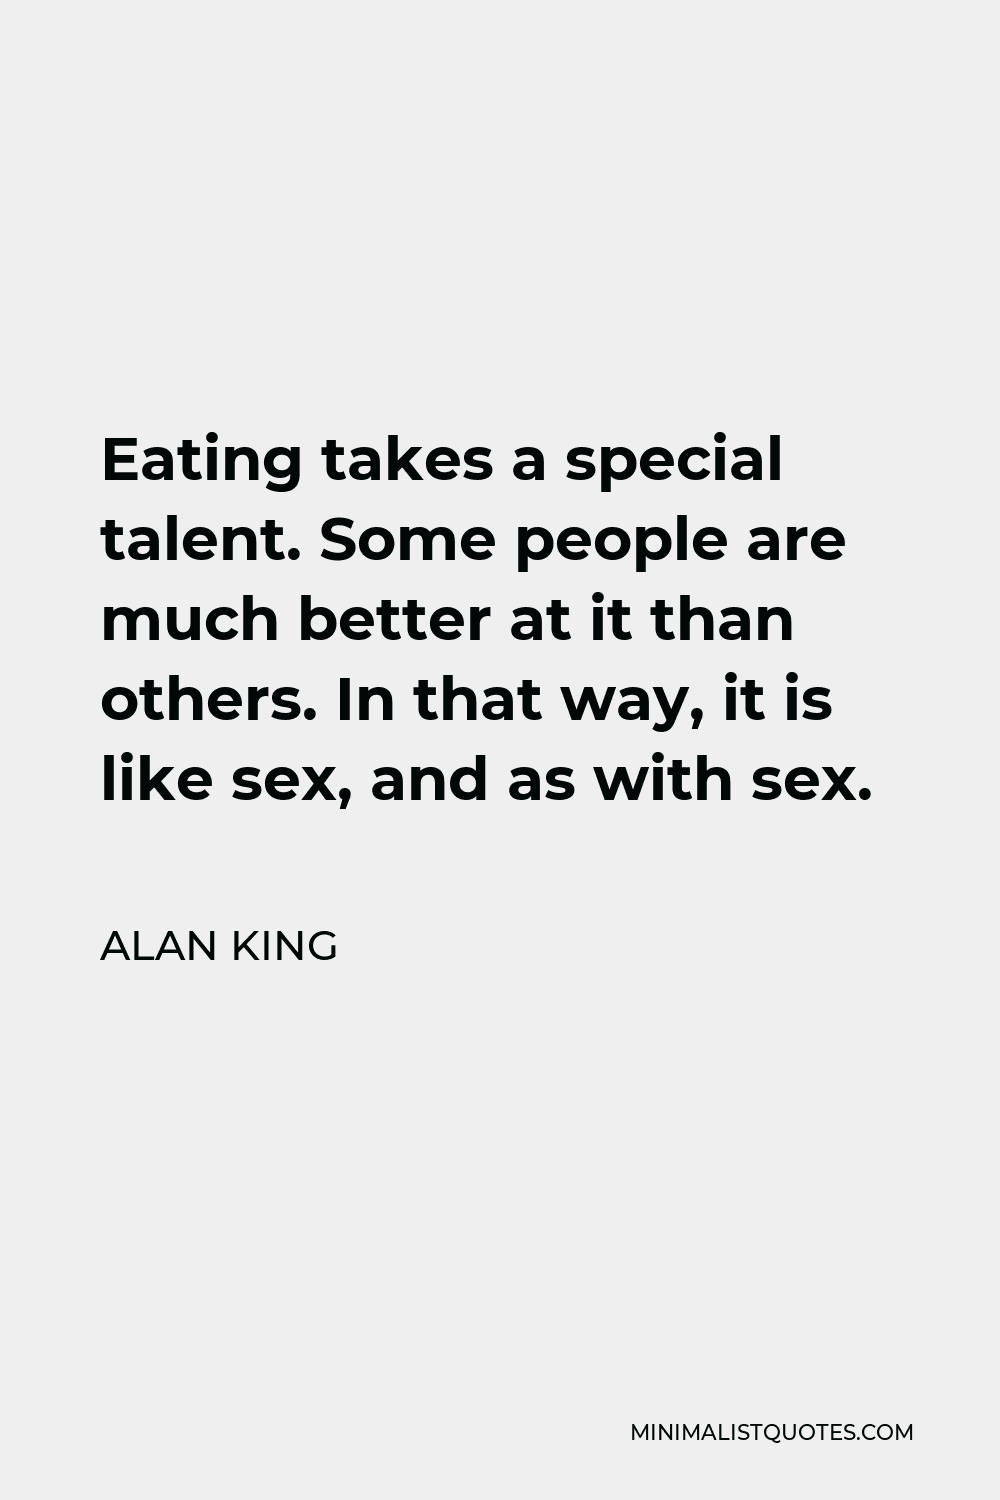 Alan King Quote - Eating takes a special talent. Some people are much better at it than others. In that way, it is like sex, and as with sex.